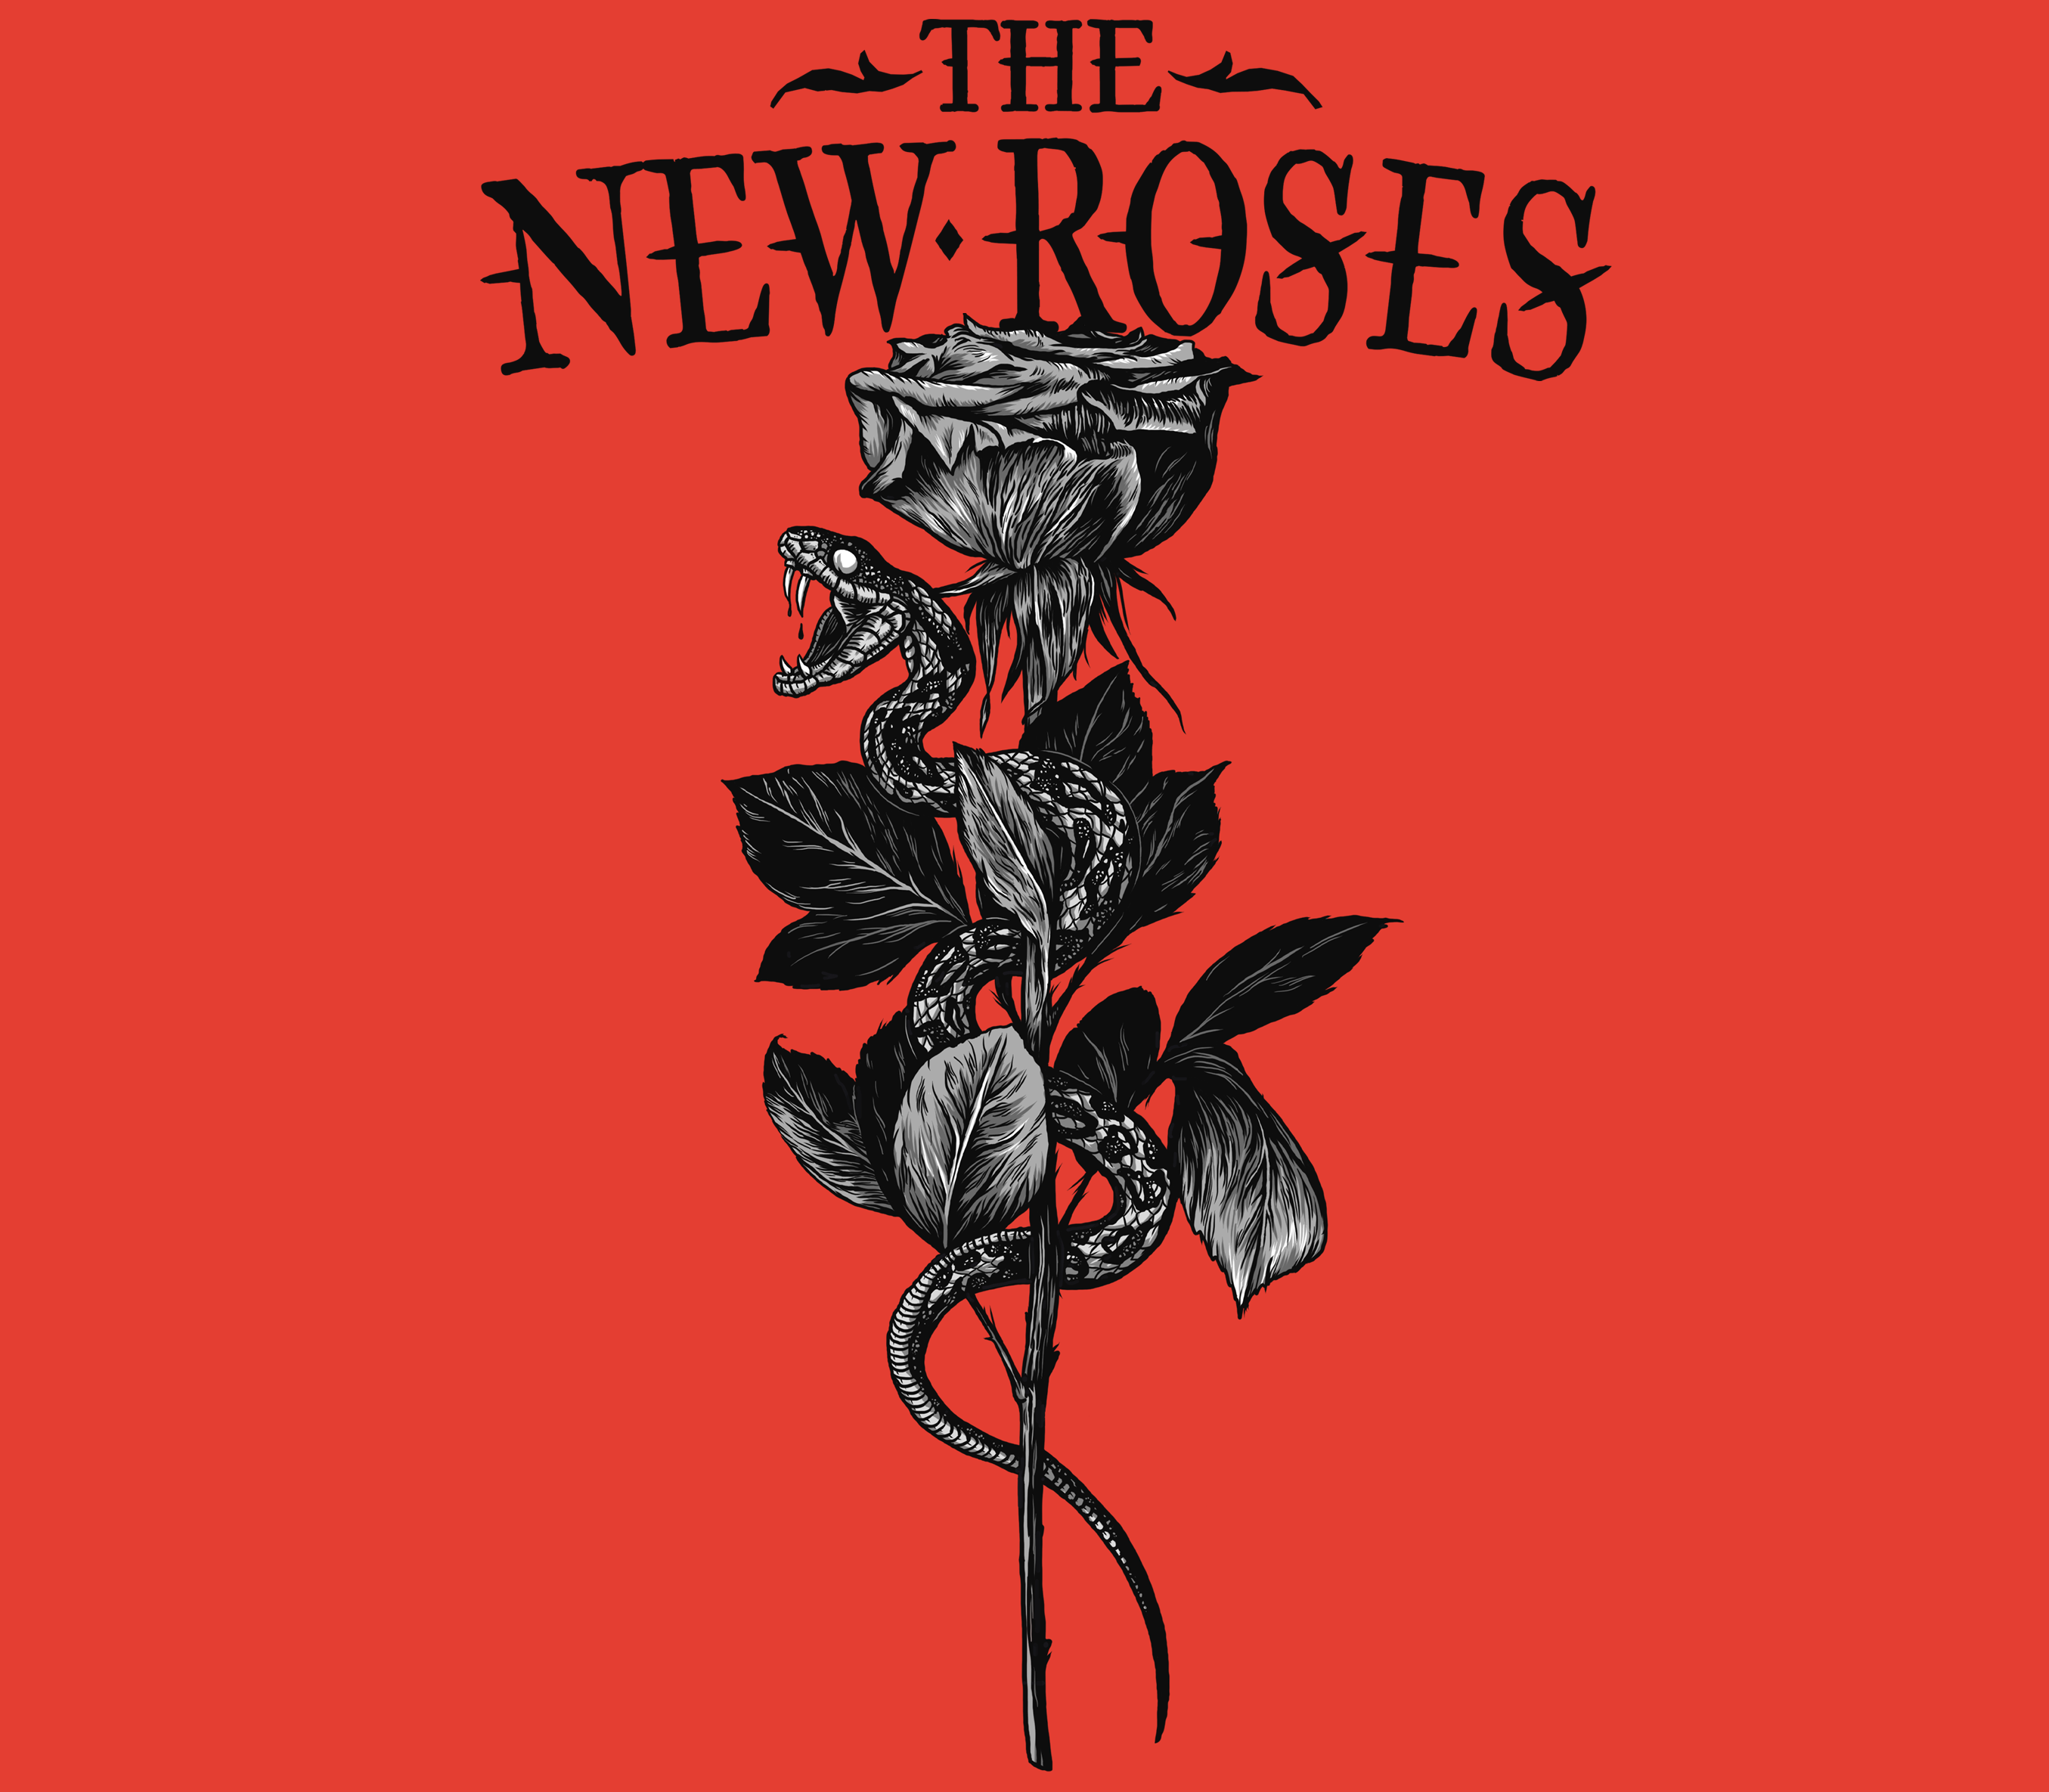 The new roses